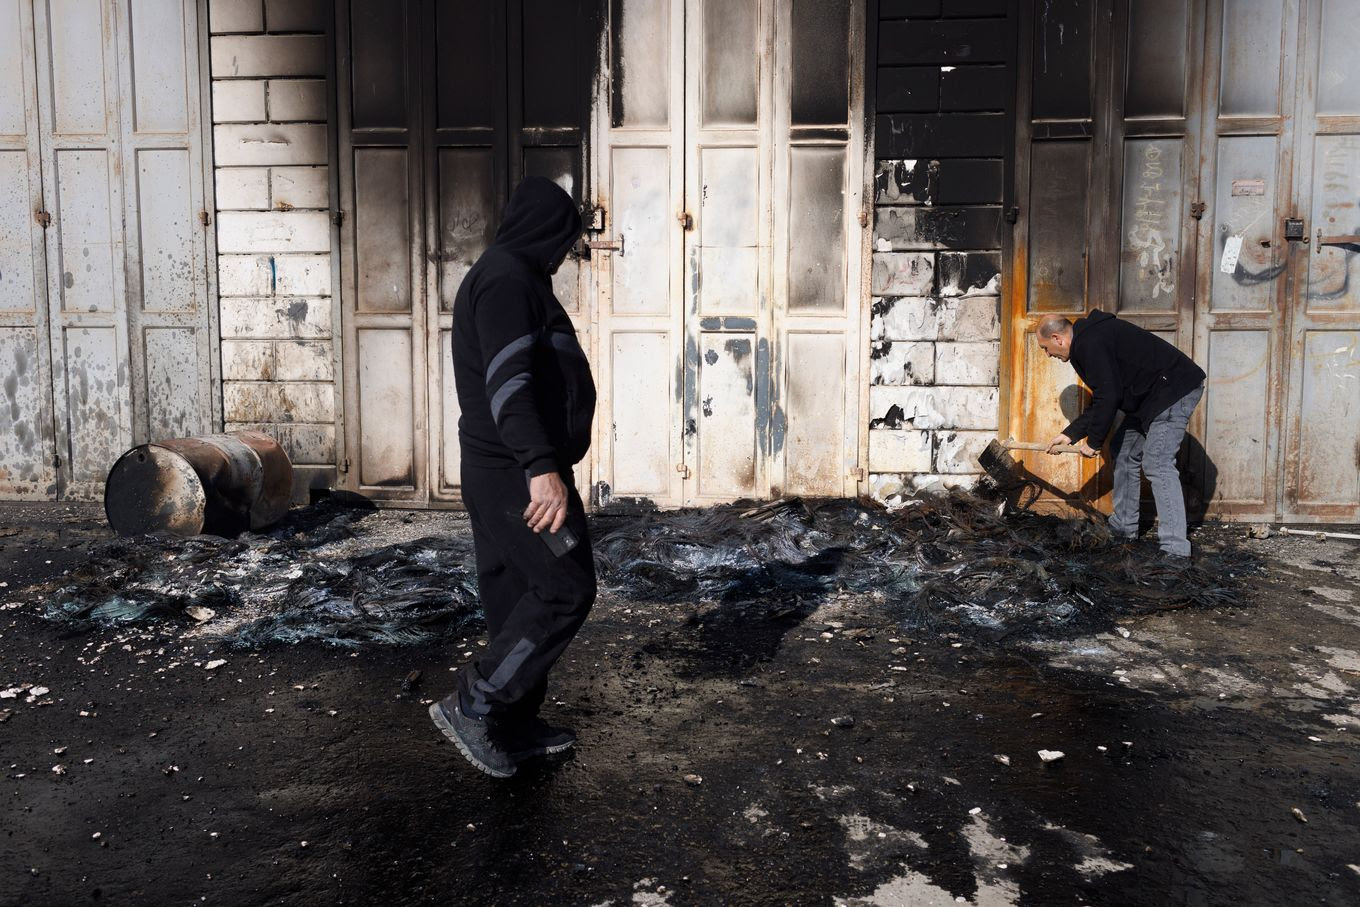 Palestinians clean a burned shop a day after the clashes between Jewish settlers and Palestinians in Huwara, West Bank, on Monday. (Kobi Wolf for The Washington Post/FTWP)